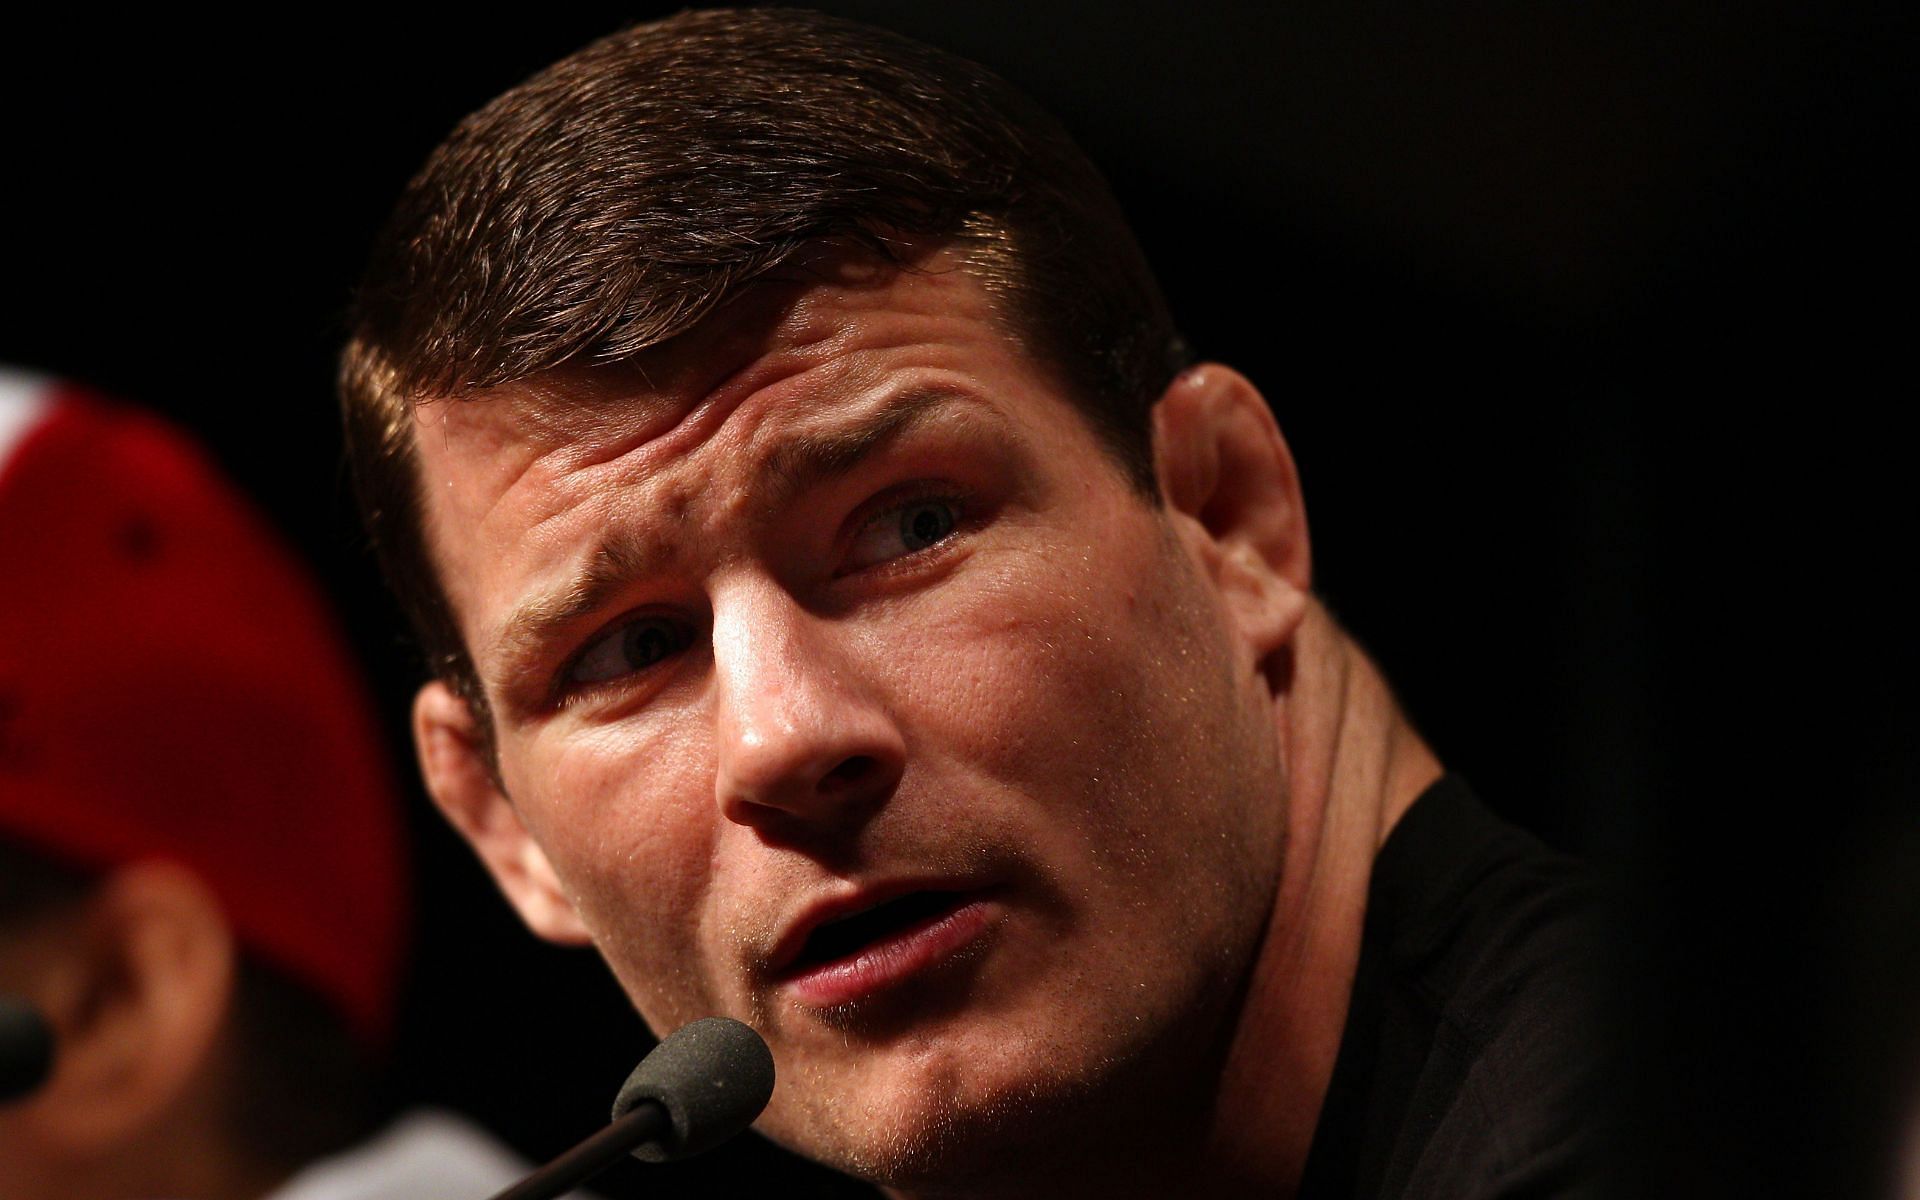 Former UFC middleweight champion, current commentator, and analyst Michael Bisping